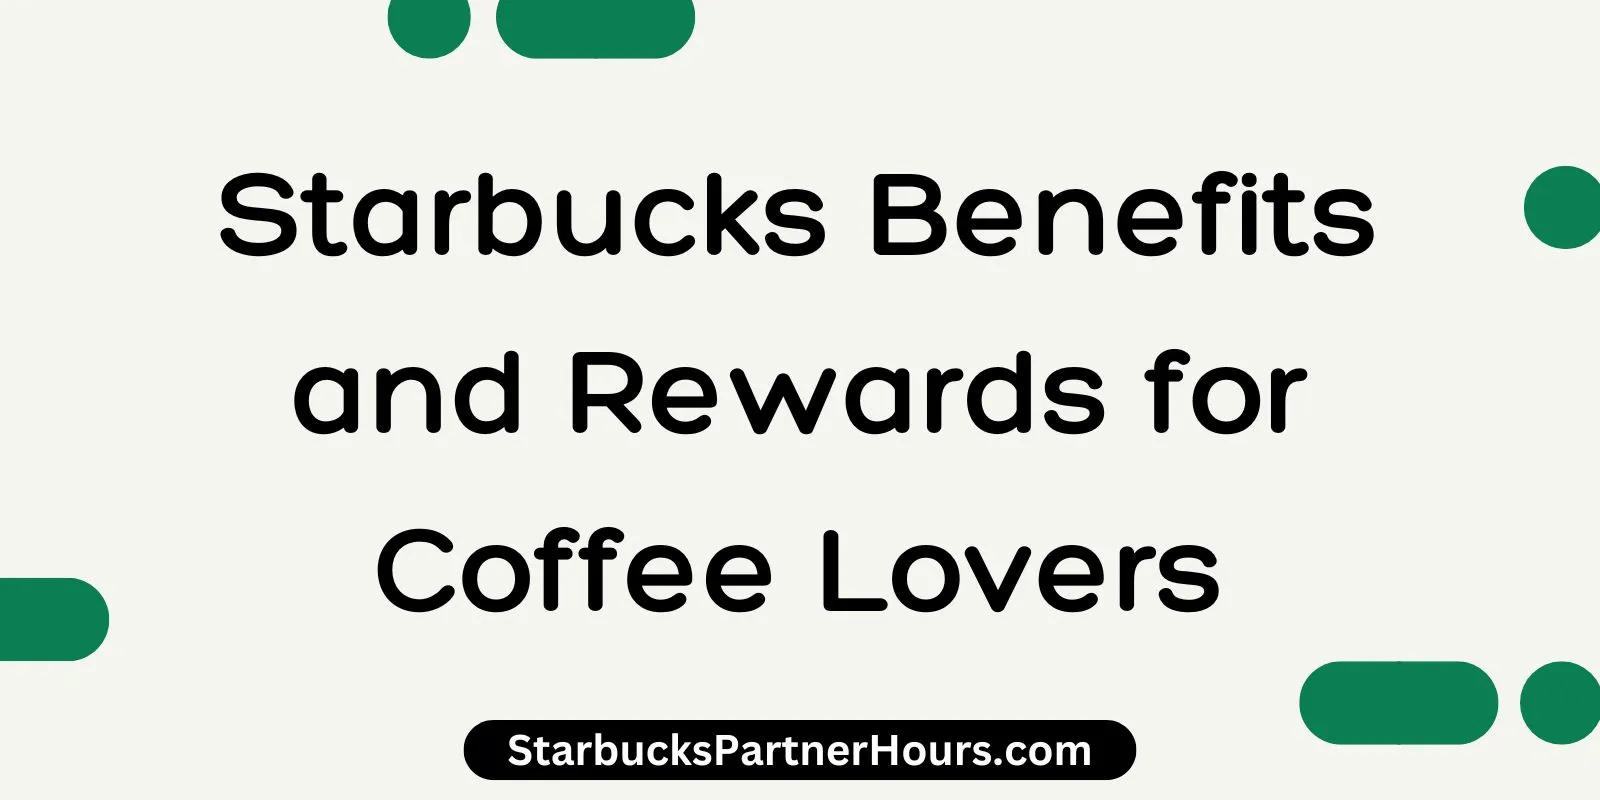 Starbucks Benefits and Rewards for Coffee Lovers